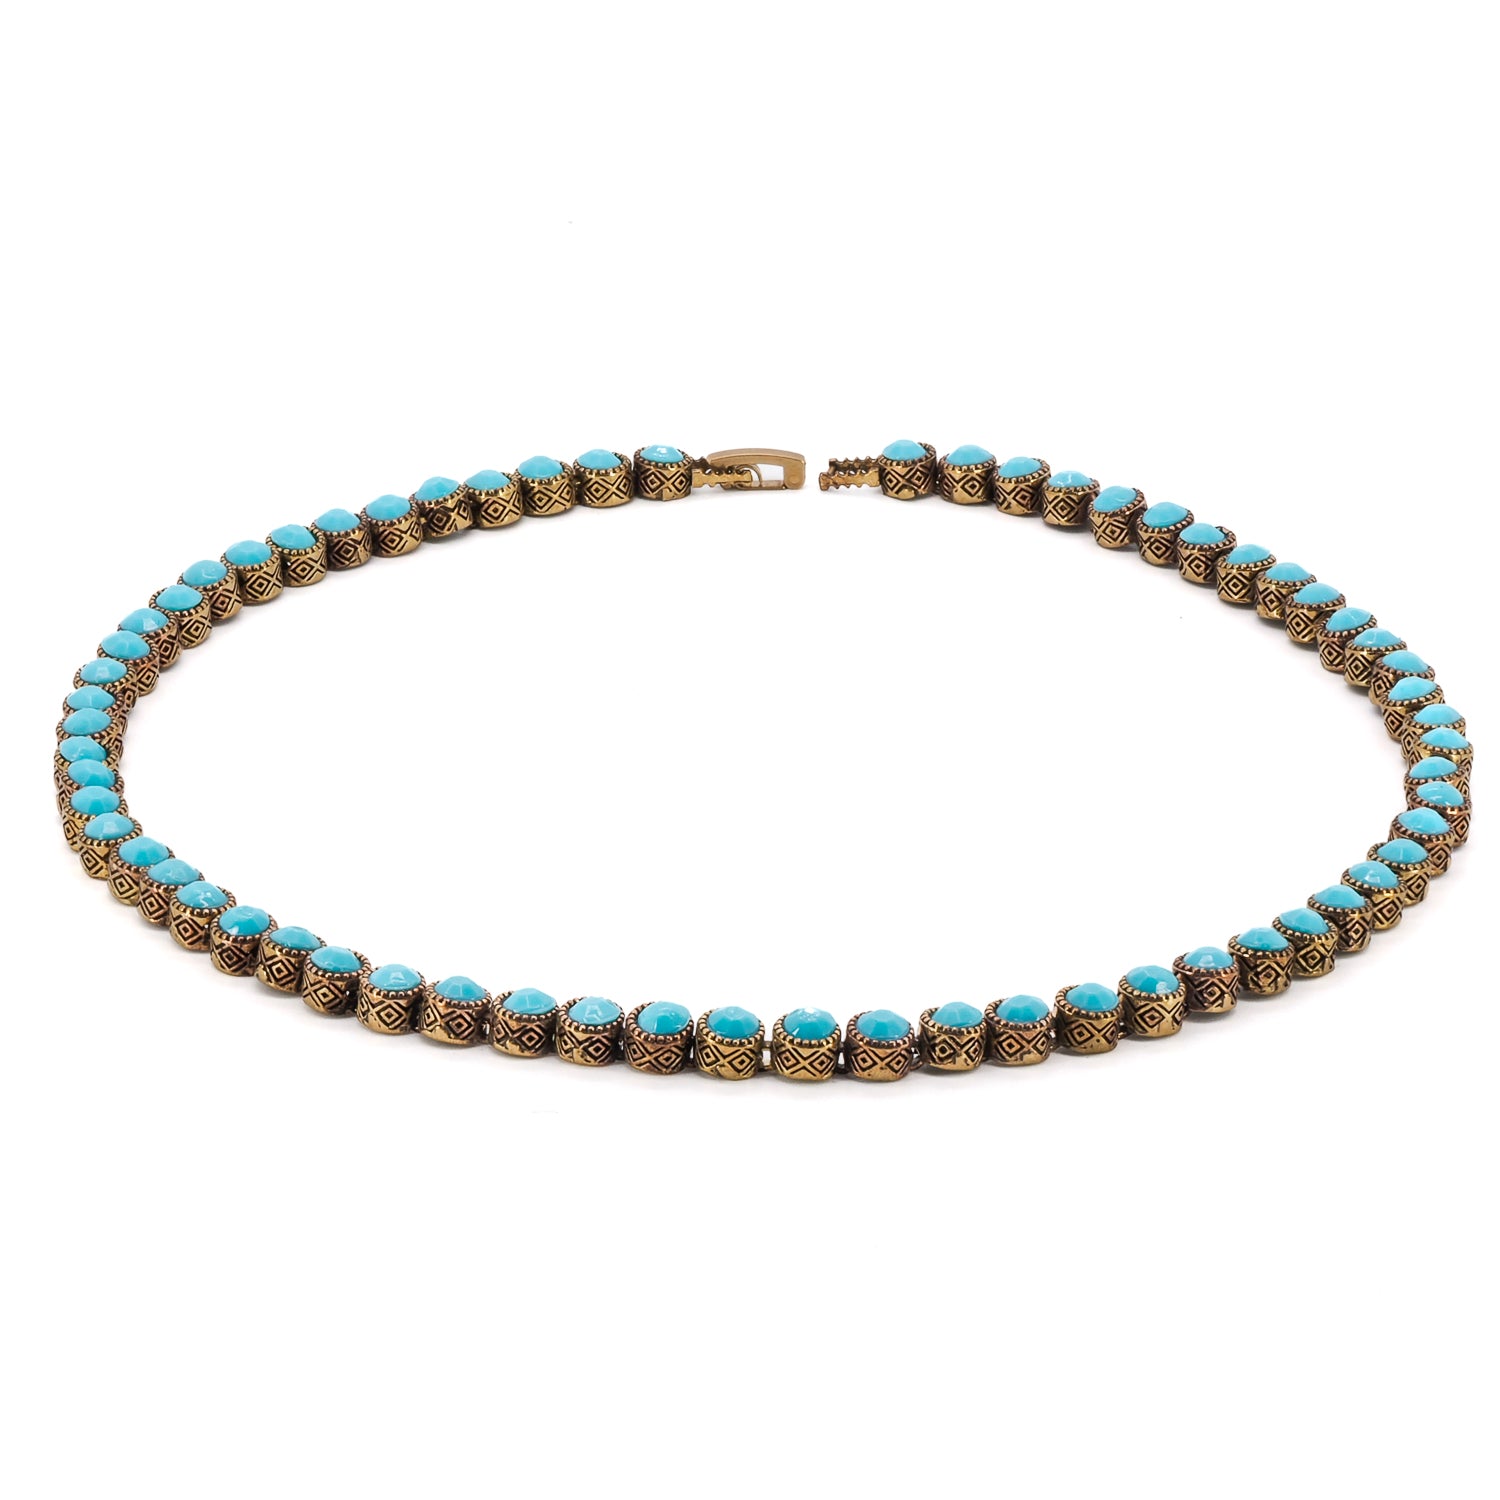 Elevate your style with the vibrant energy of turquoise in this handmade bronze tennis necklace.